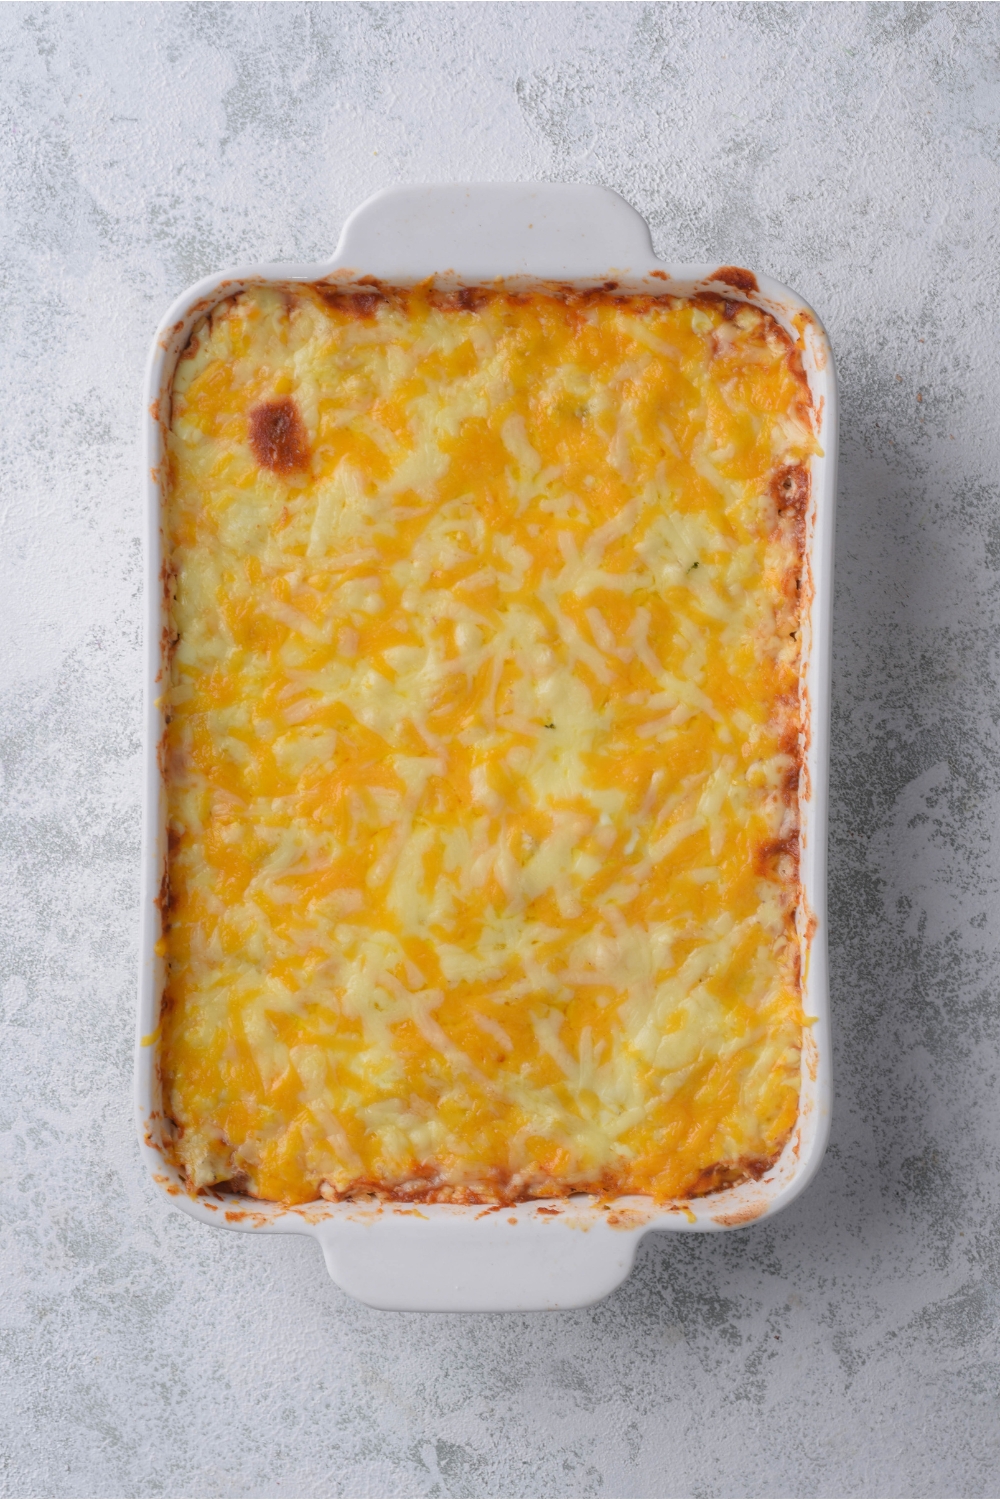 Overhead view of a freshly baked casserole covered in melted shredded cheese.